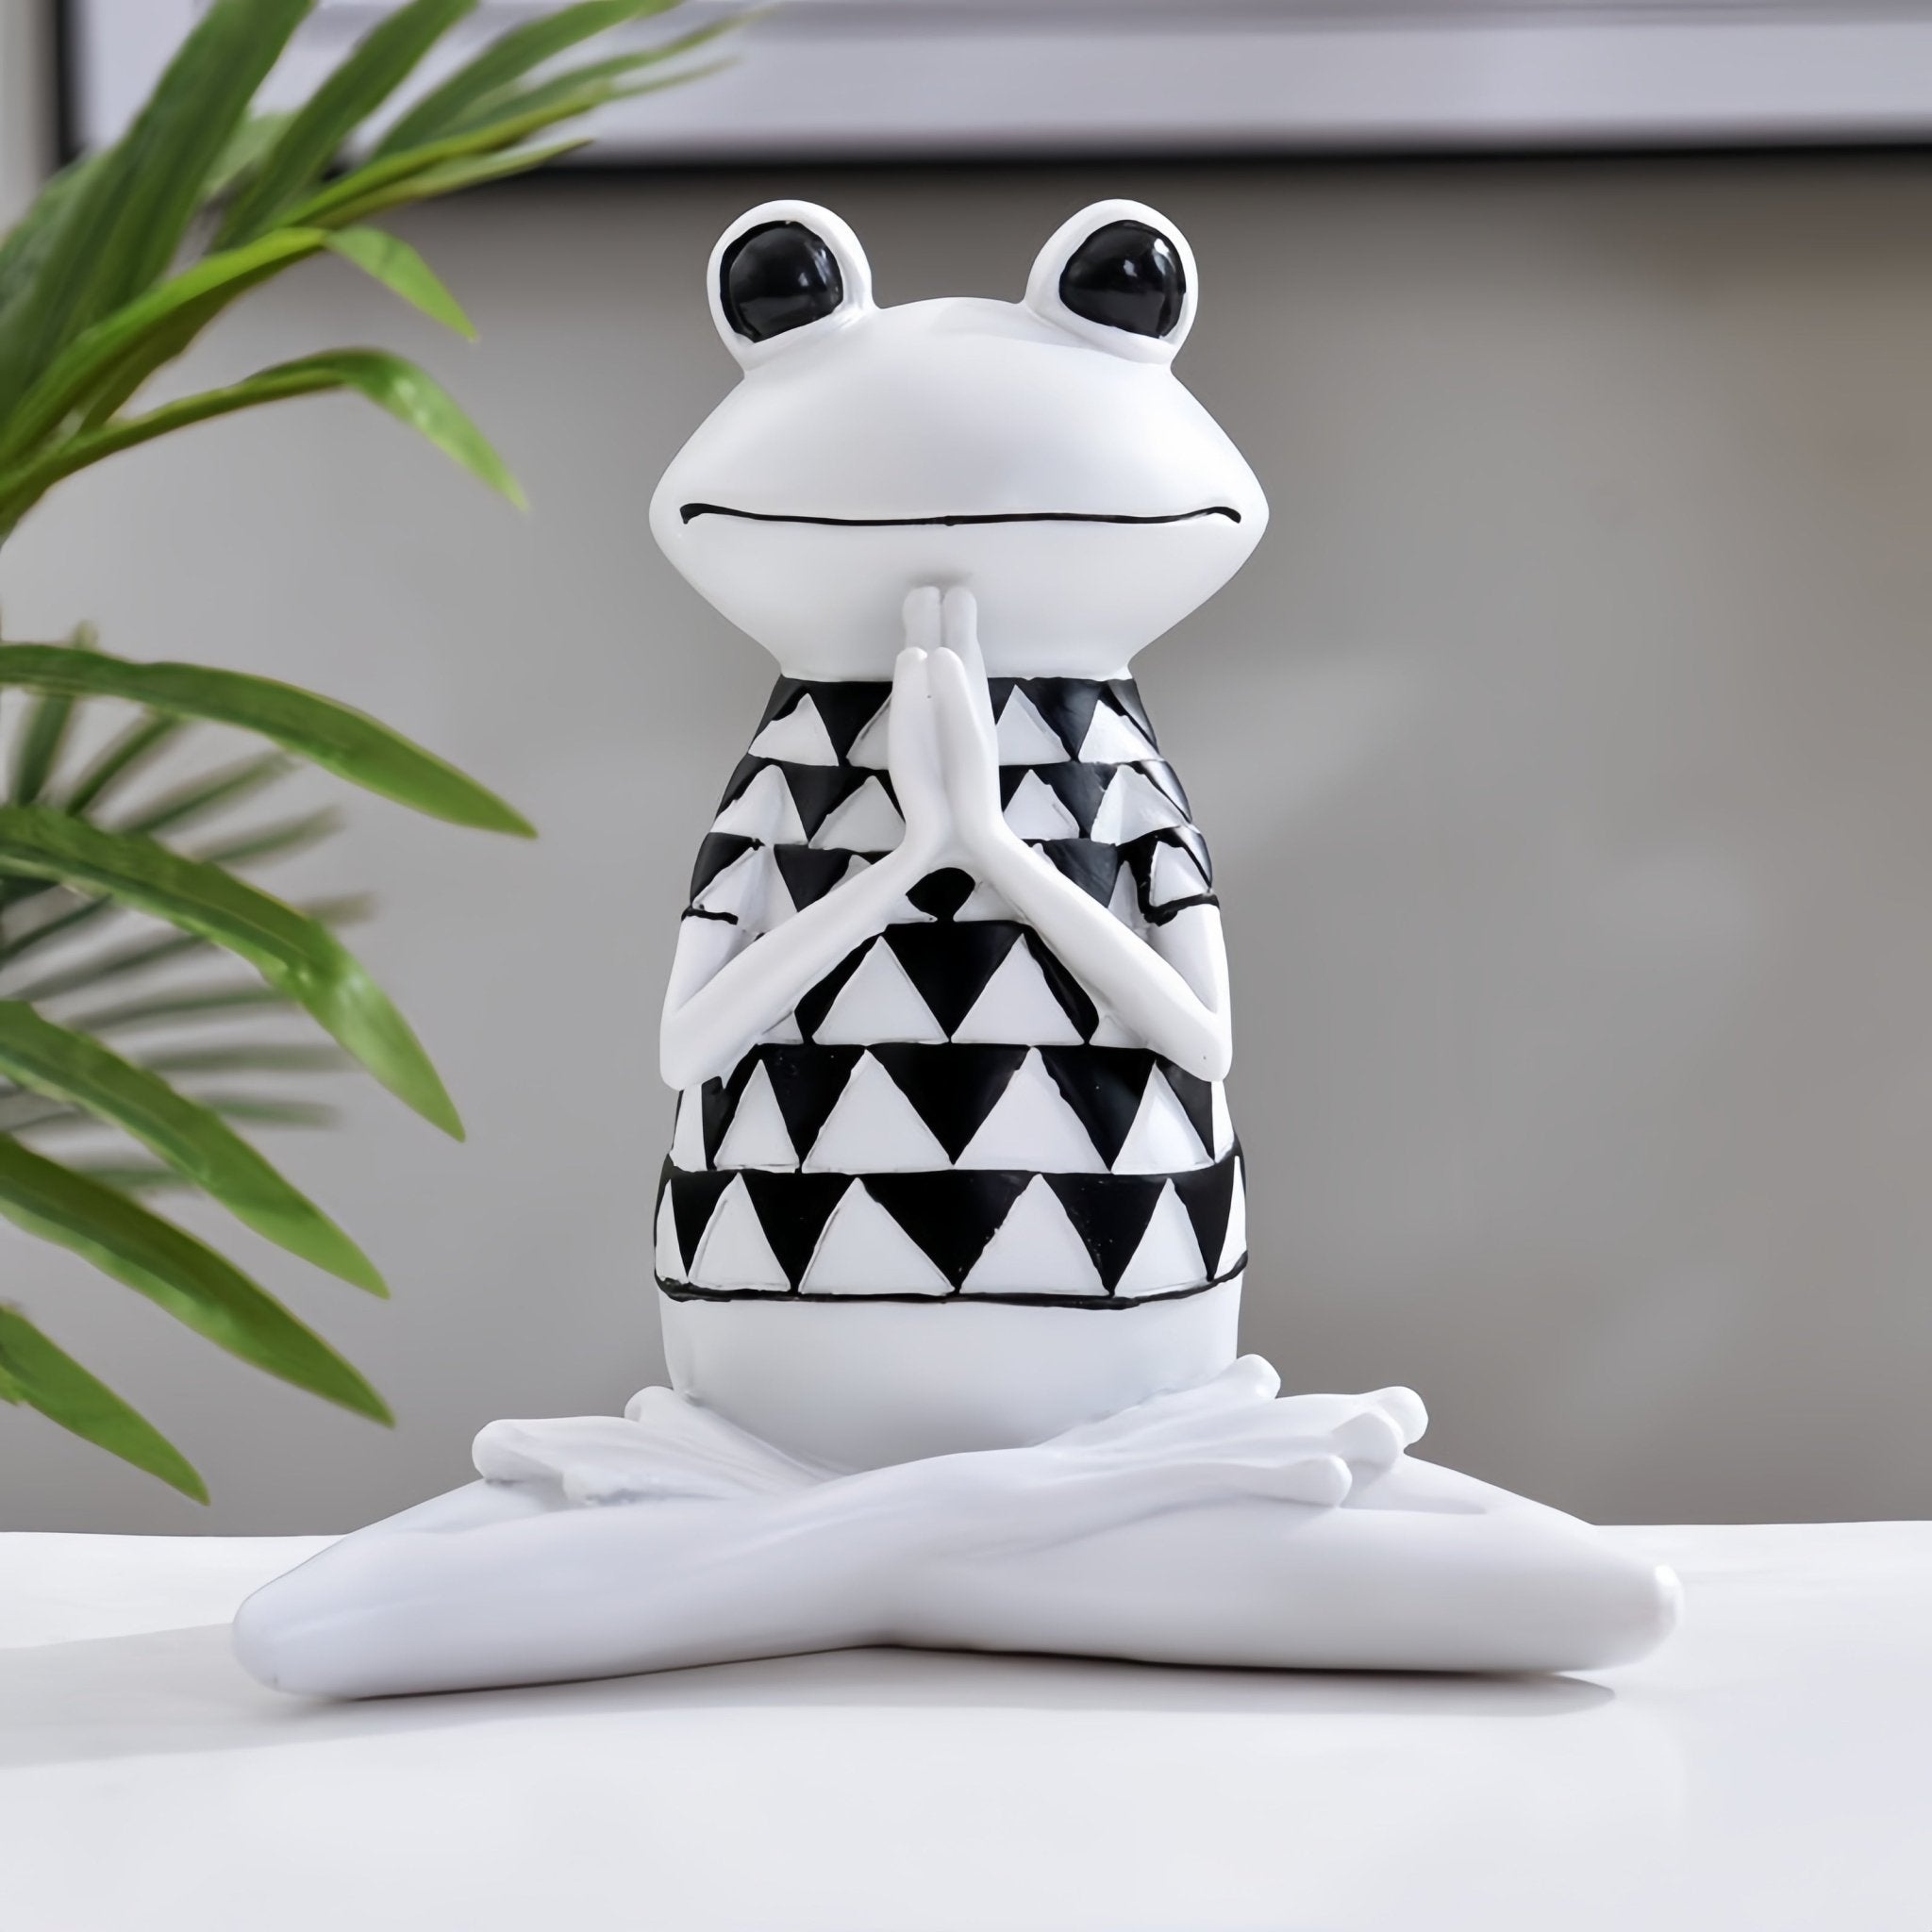 Harmony Zen Frog Statue in a hands-together sitting pose, set against a modern minimalist backdrop.